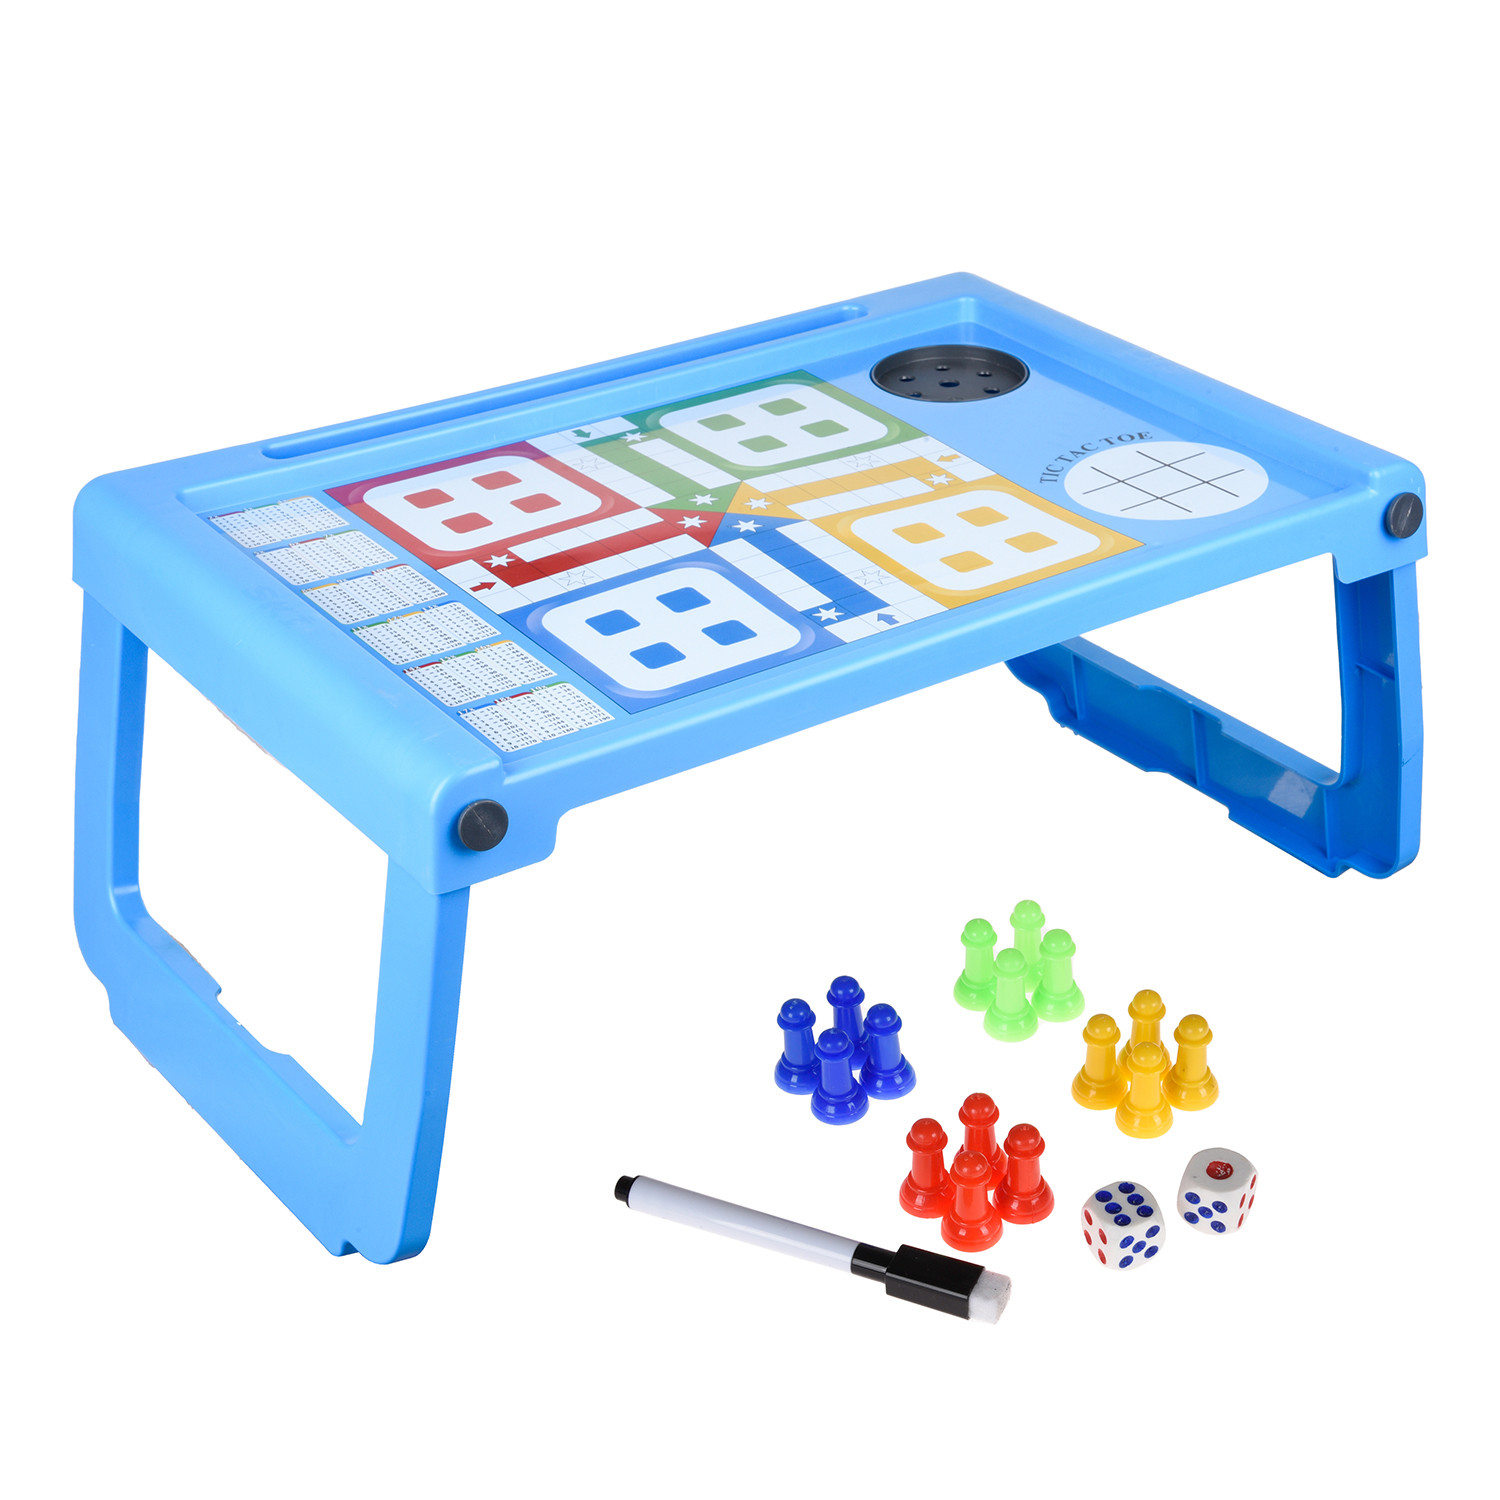 Kuber Industries Study Table | Study Bed Table for Kids | Foldable Study Table | Ludo Game Table for Kids | Laptop Support Table | Kids Gaming Study Ludo Table with Bottle Holder | Blue